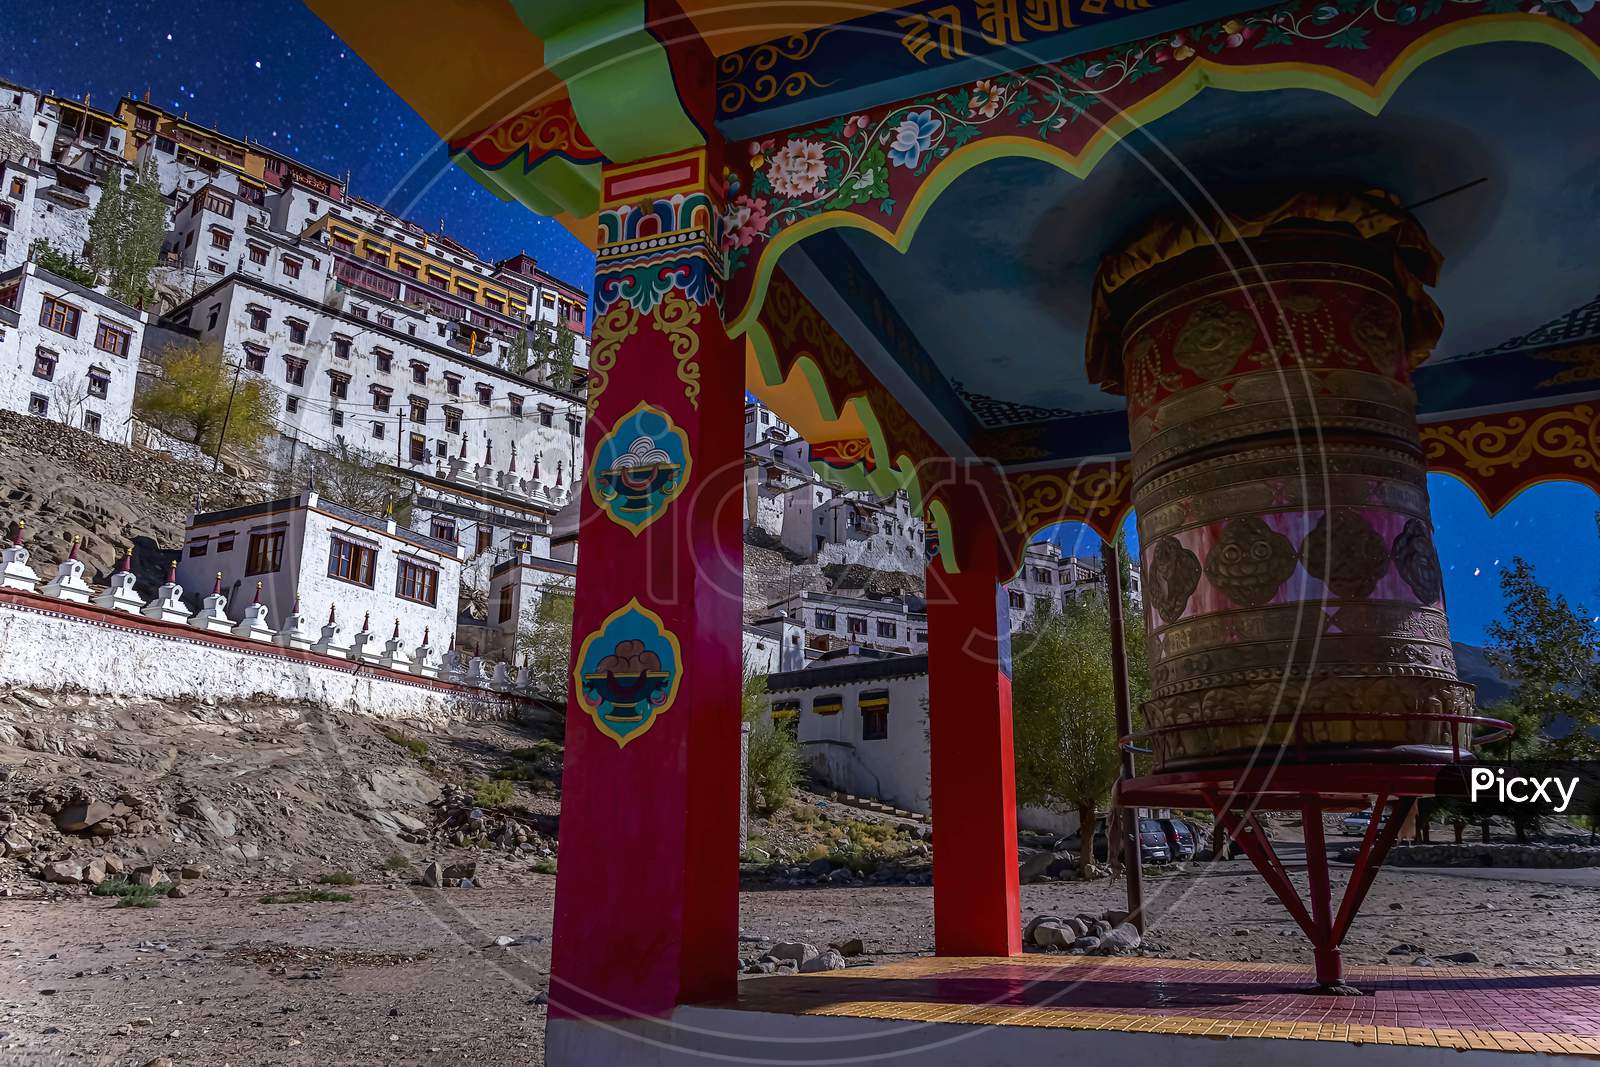 The big colourful buddhist prayer wheel under a starry sky as seen at the Thikse Monastery near Leh city, Ladakh, India